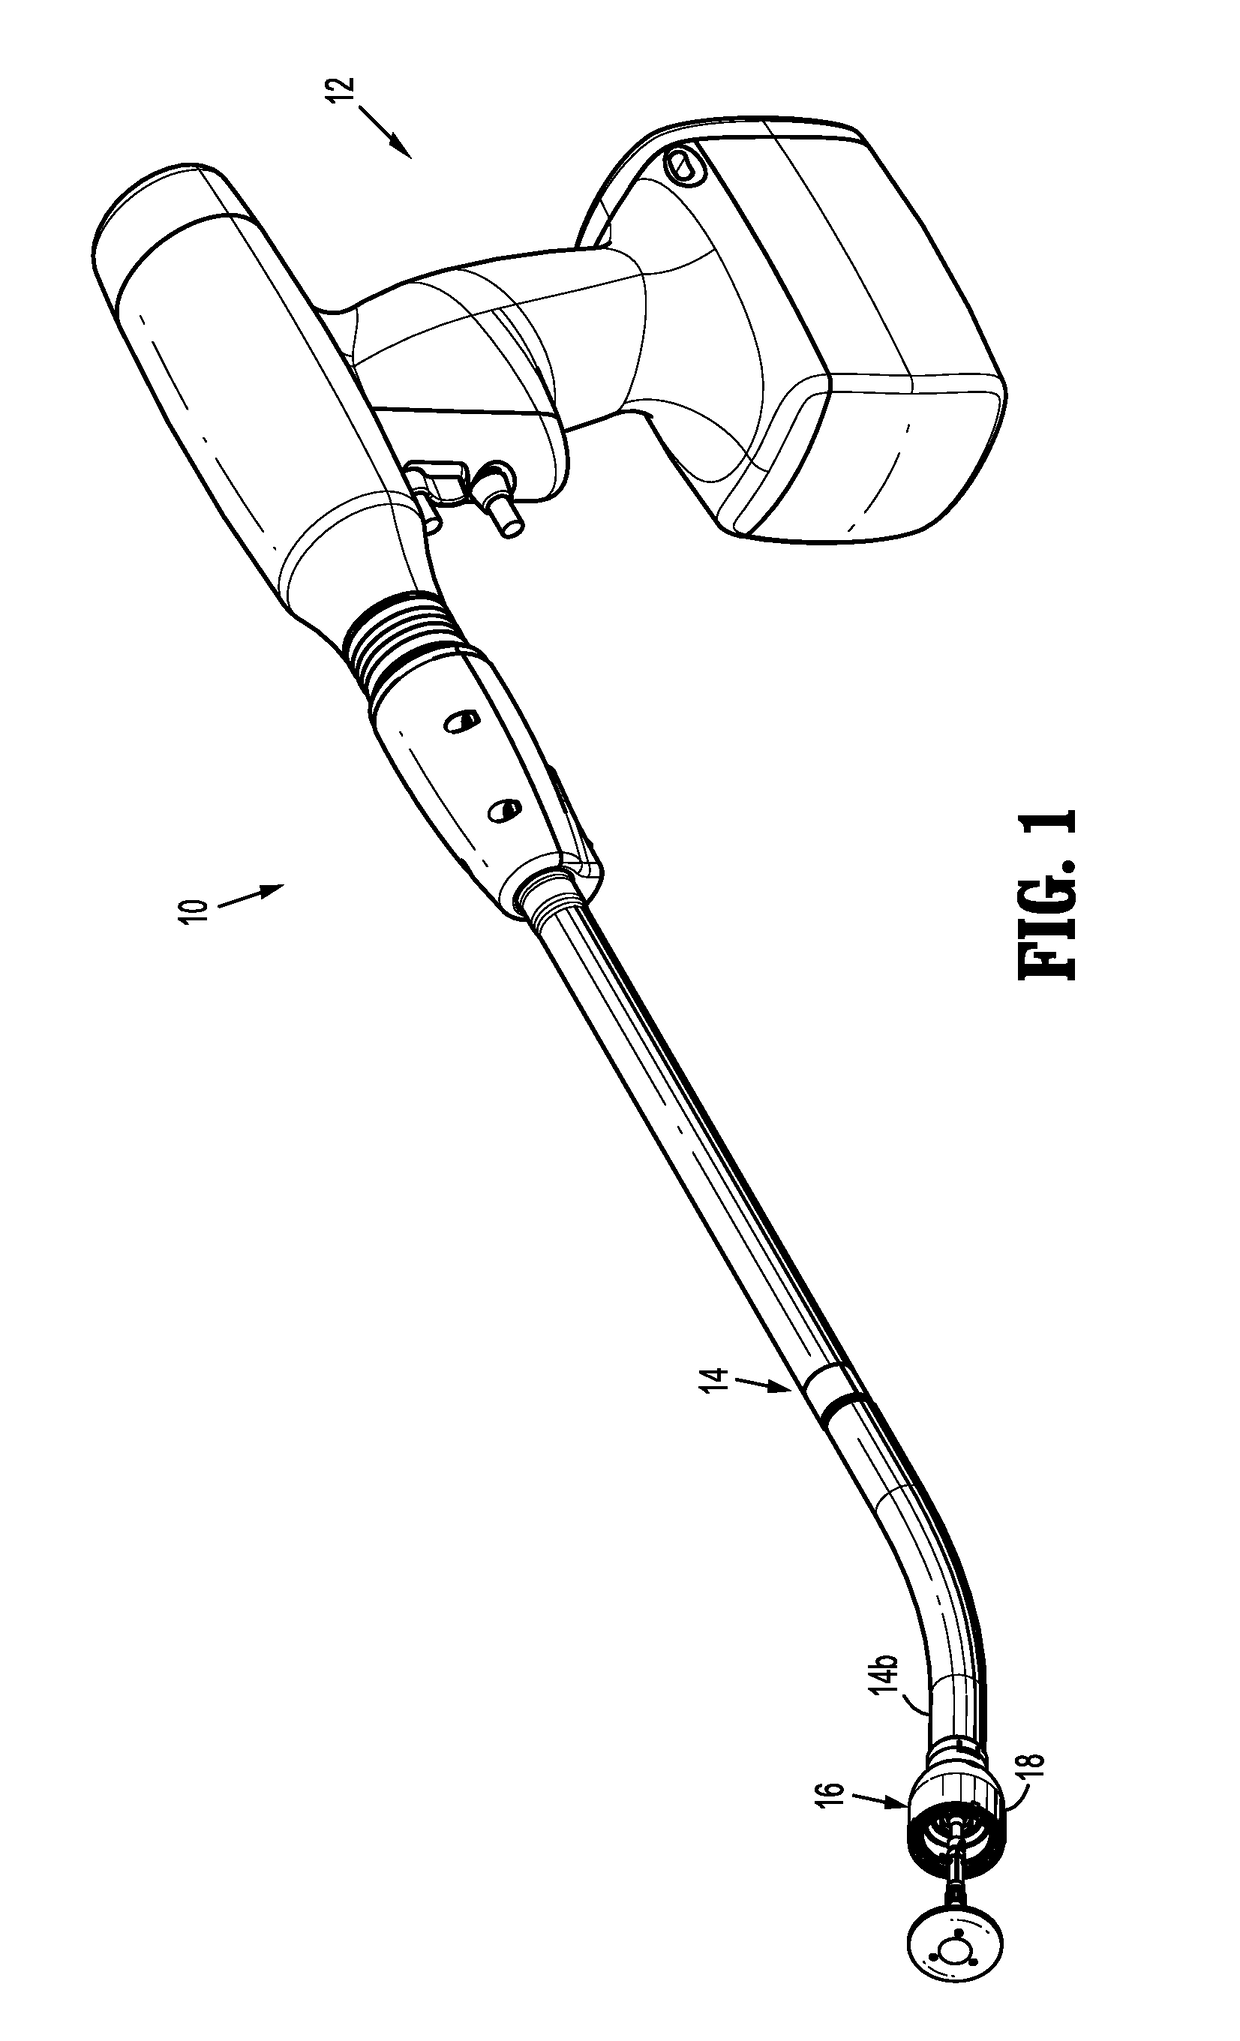 Chip assembly for reusable surgical instruments